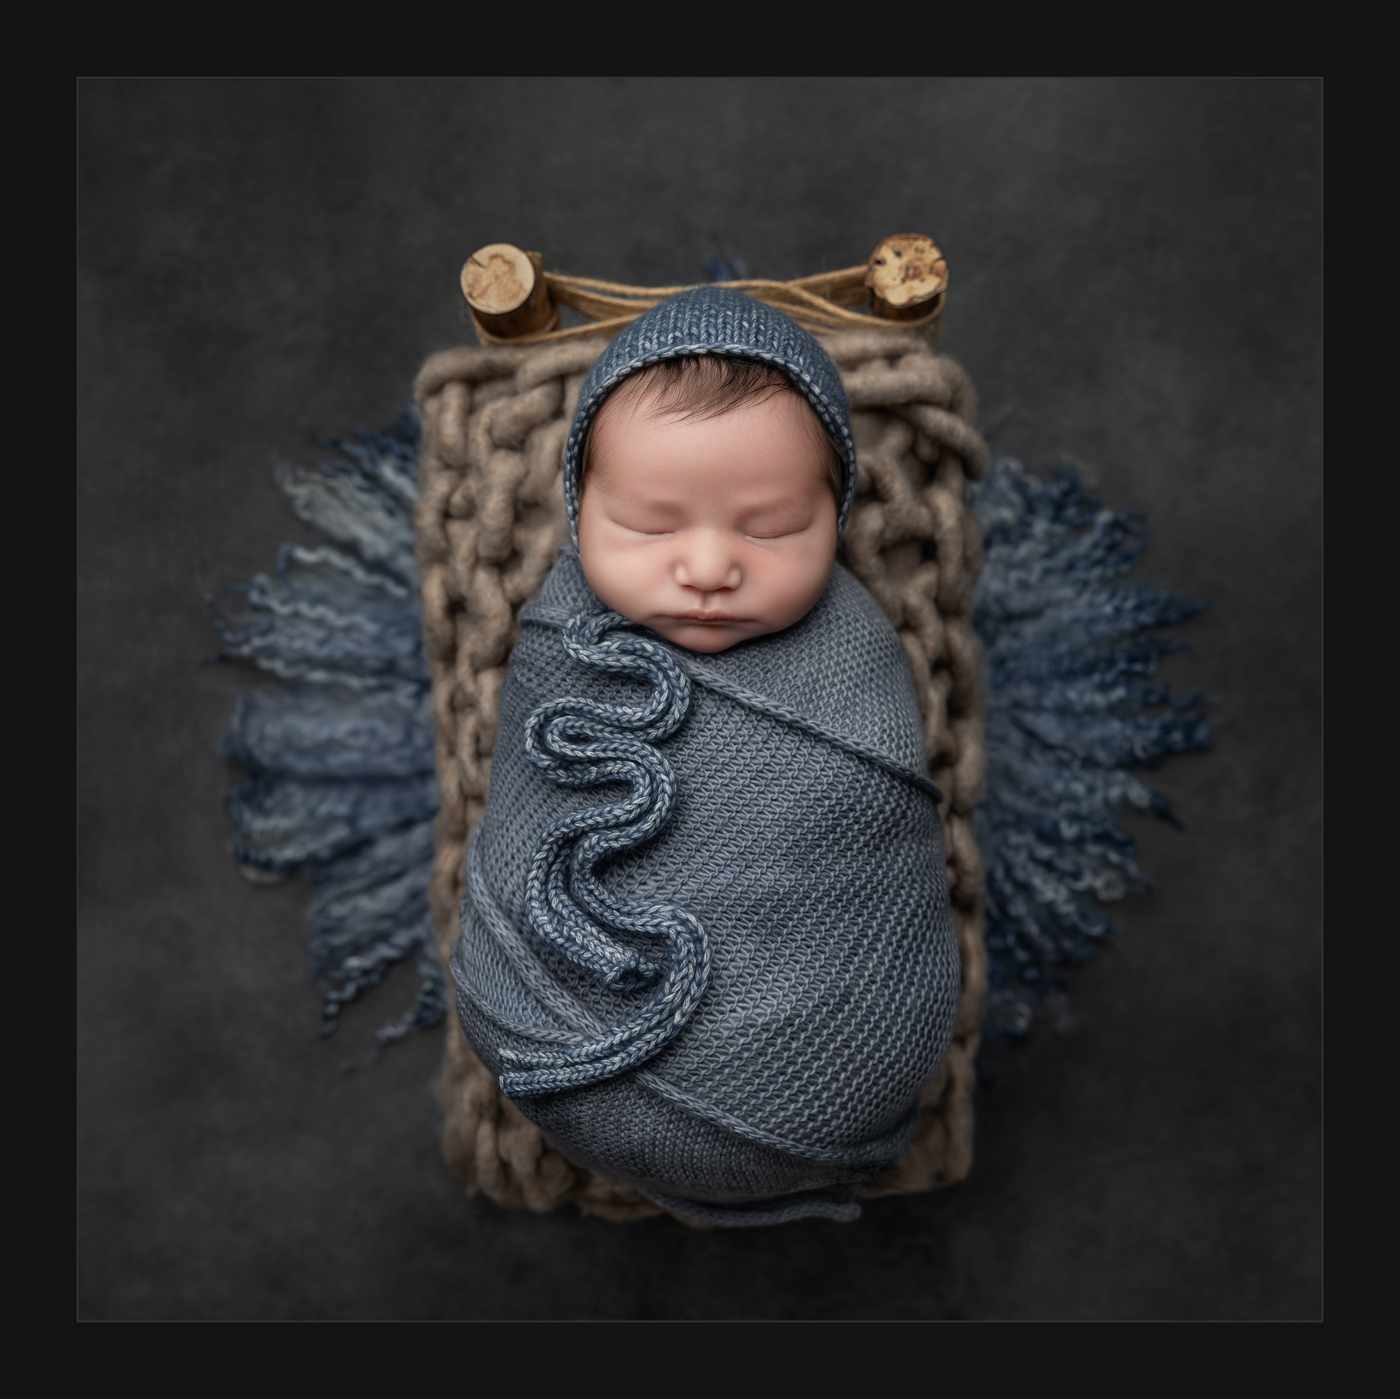 Marcela Limon is a Fine Art photographer specializing in maternity, newborn and baby photography.